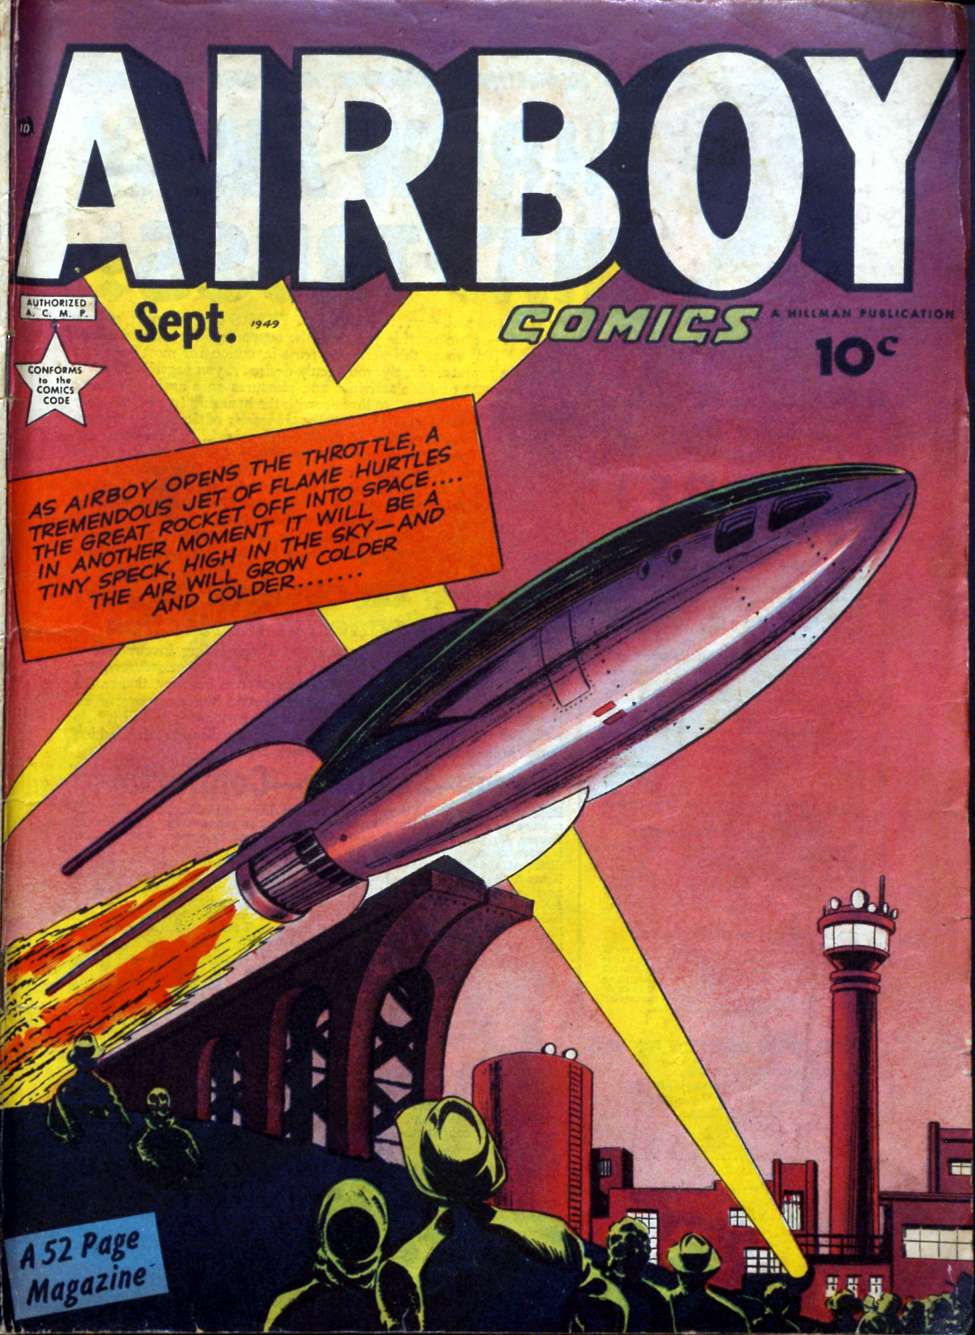 Book Cover For Airboy Comics v6 8